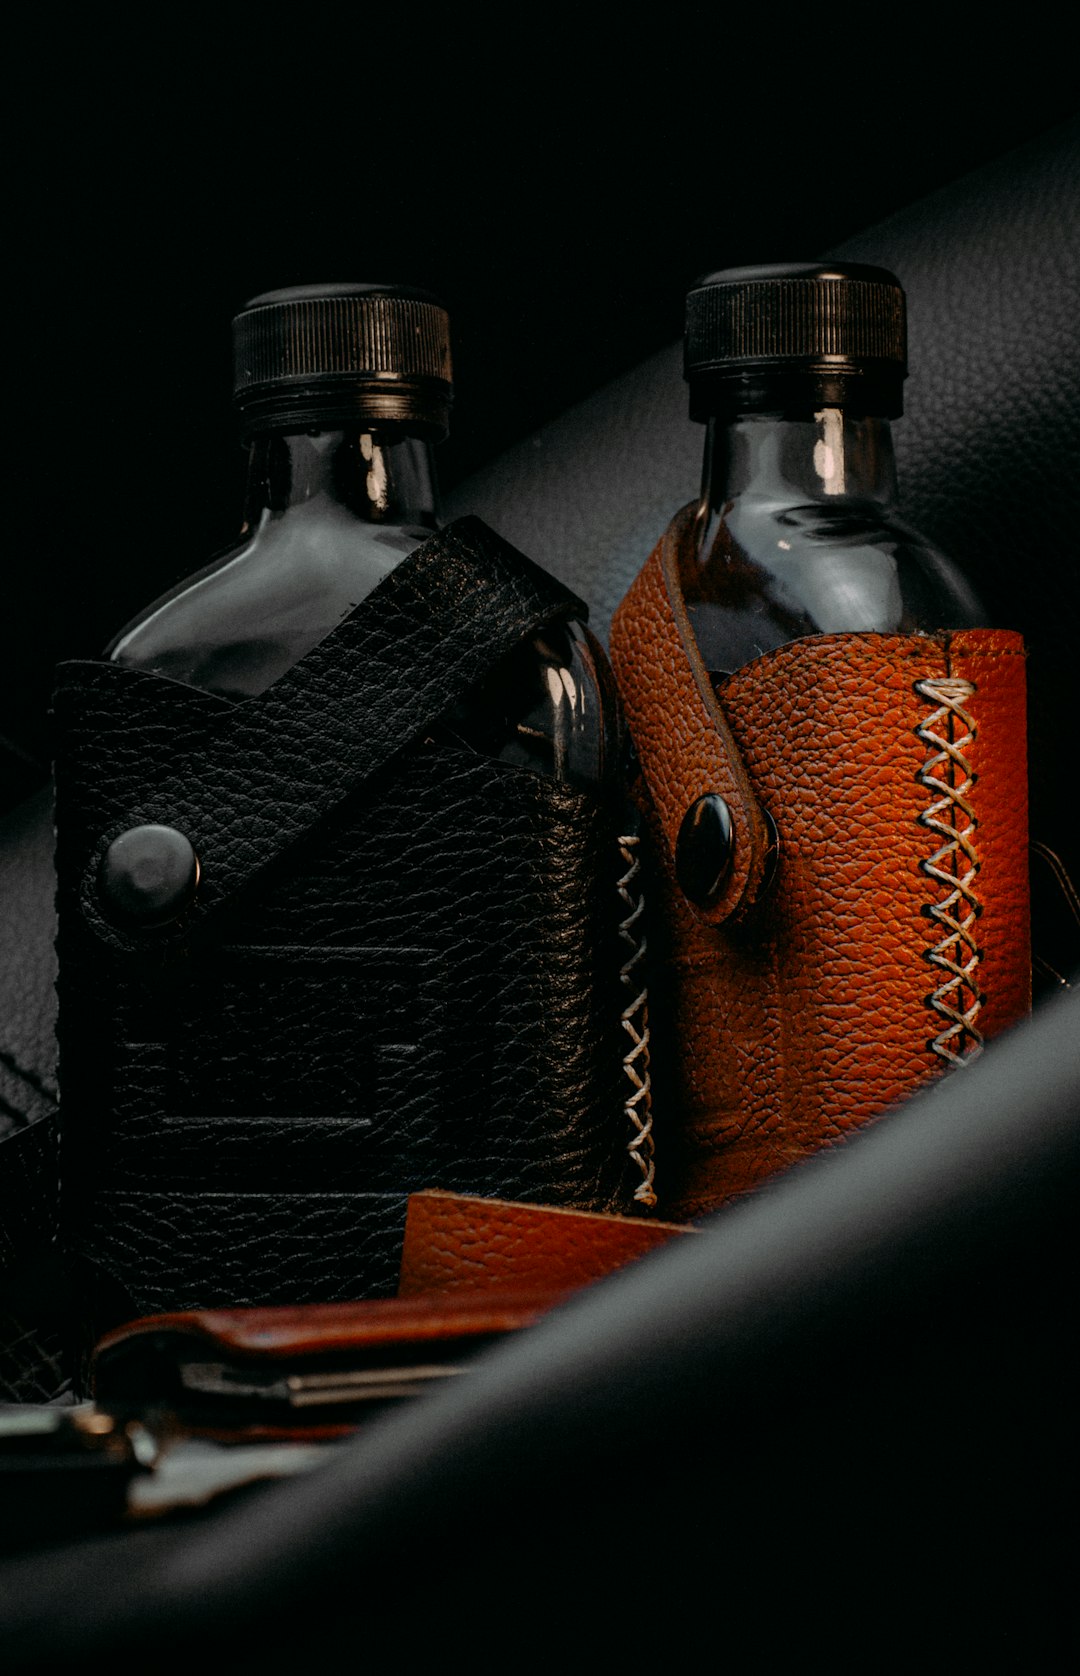 black and brown bottle on brown leather bag